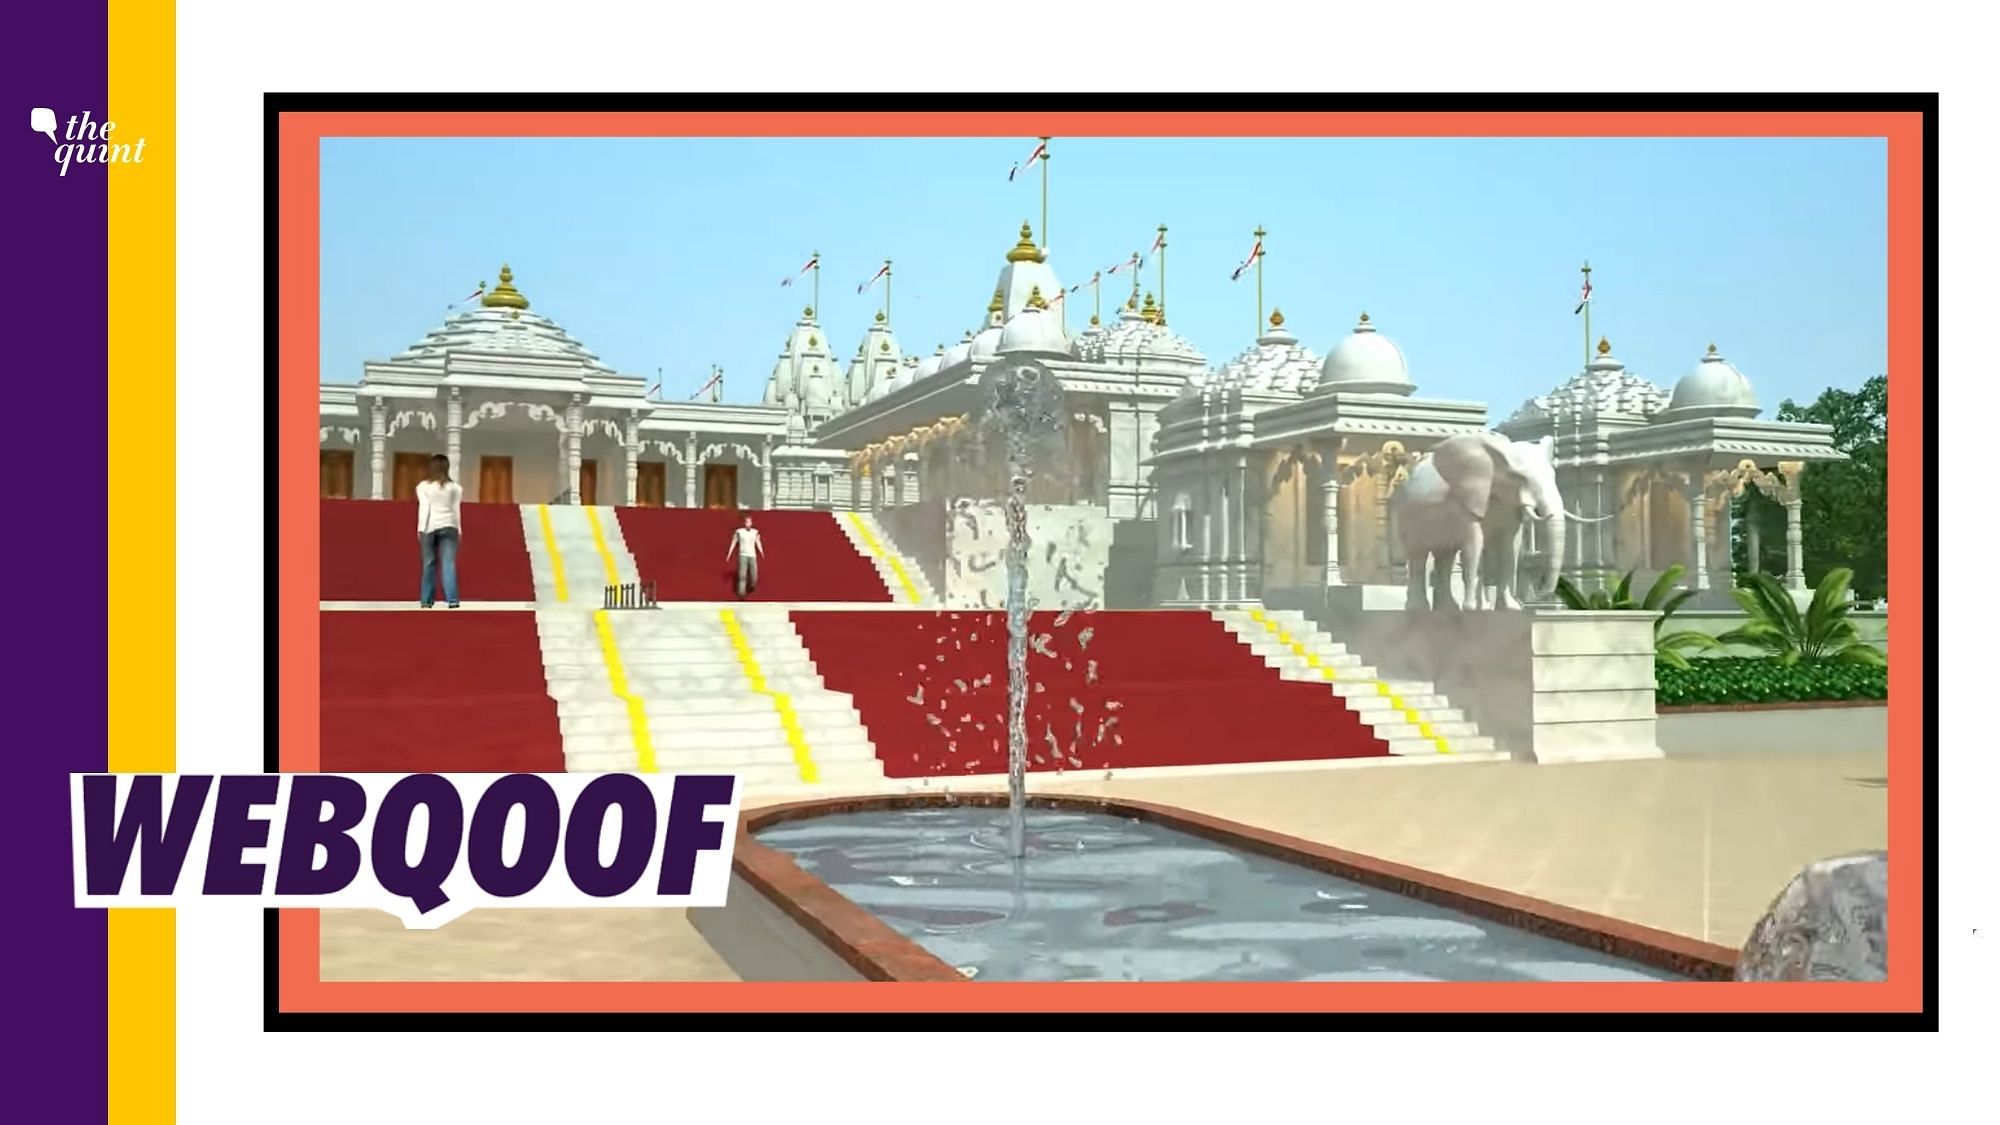 The video is actually from 2014 and is intended to be a virtual model of a Jain temple.